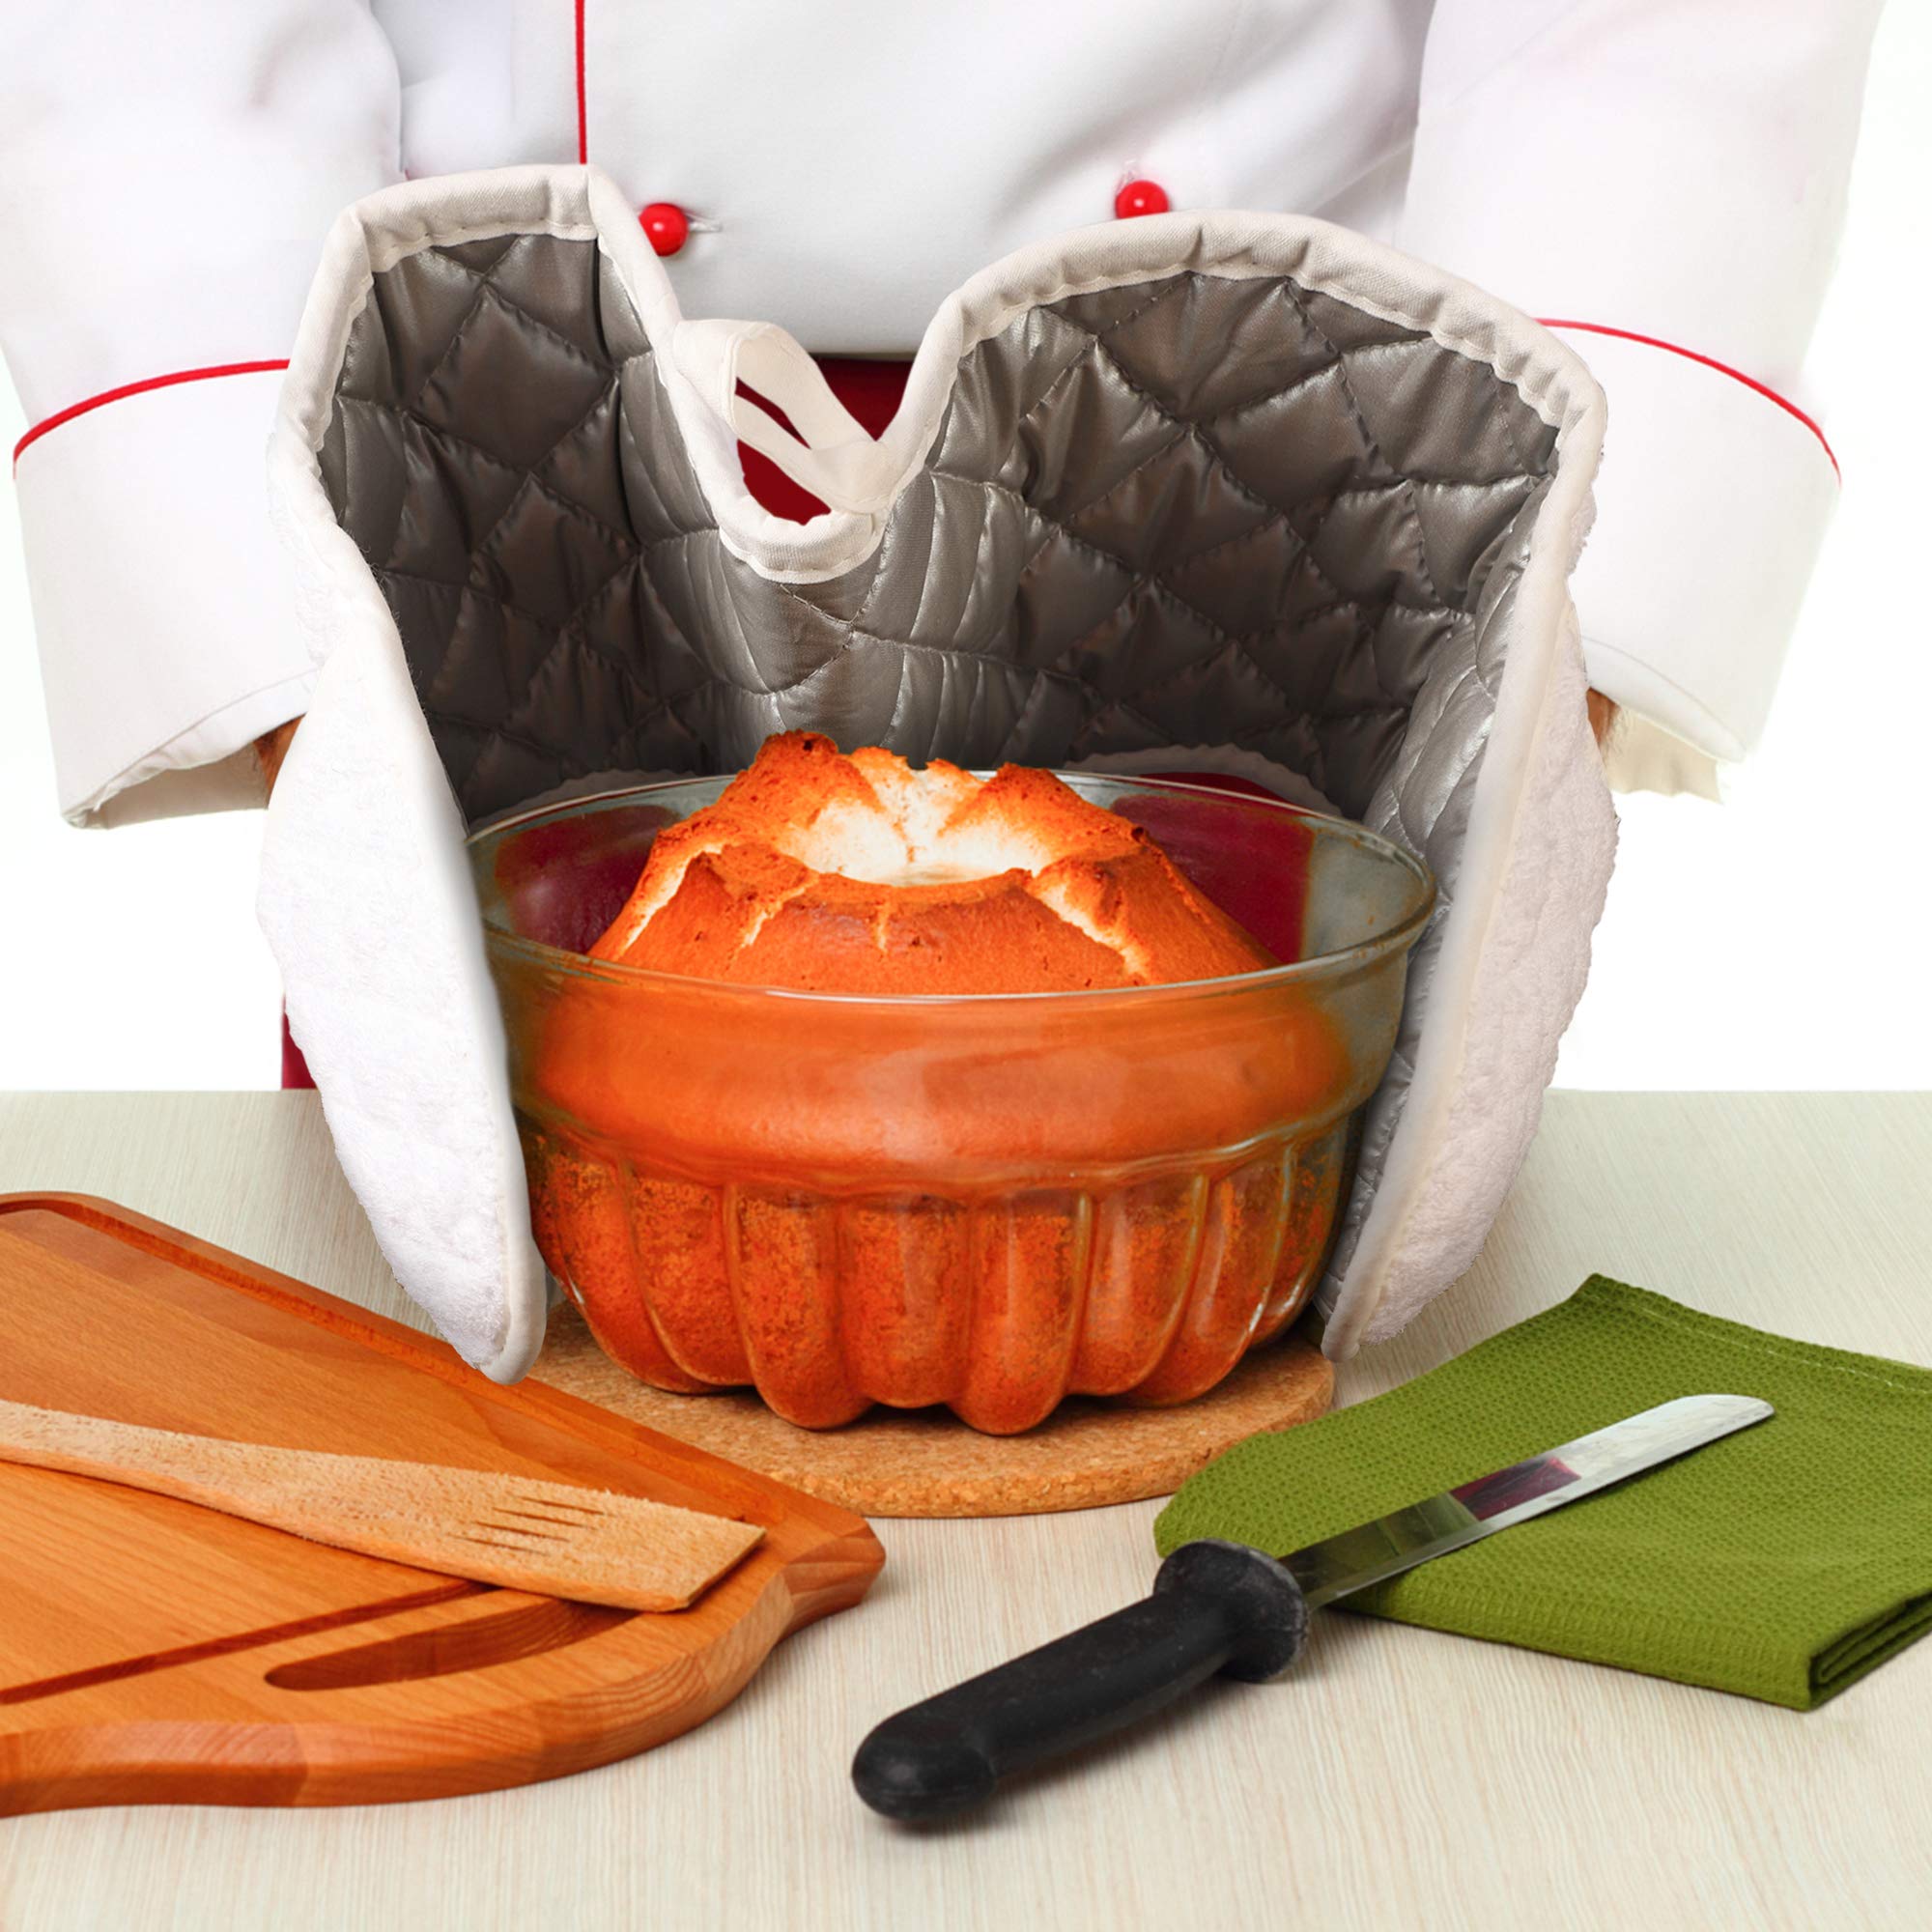 ARCLIBER Oven Mitts and Double Mitts Pot Holder Set